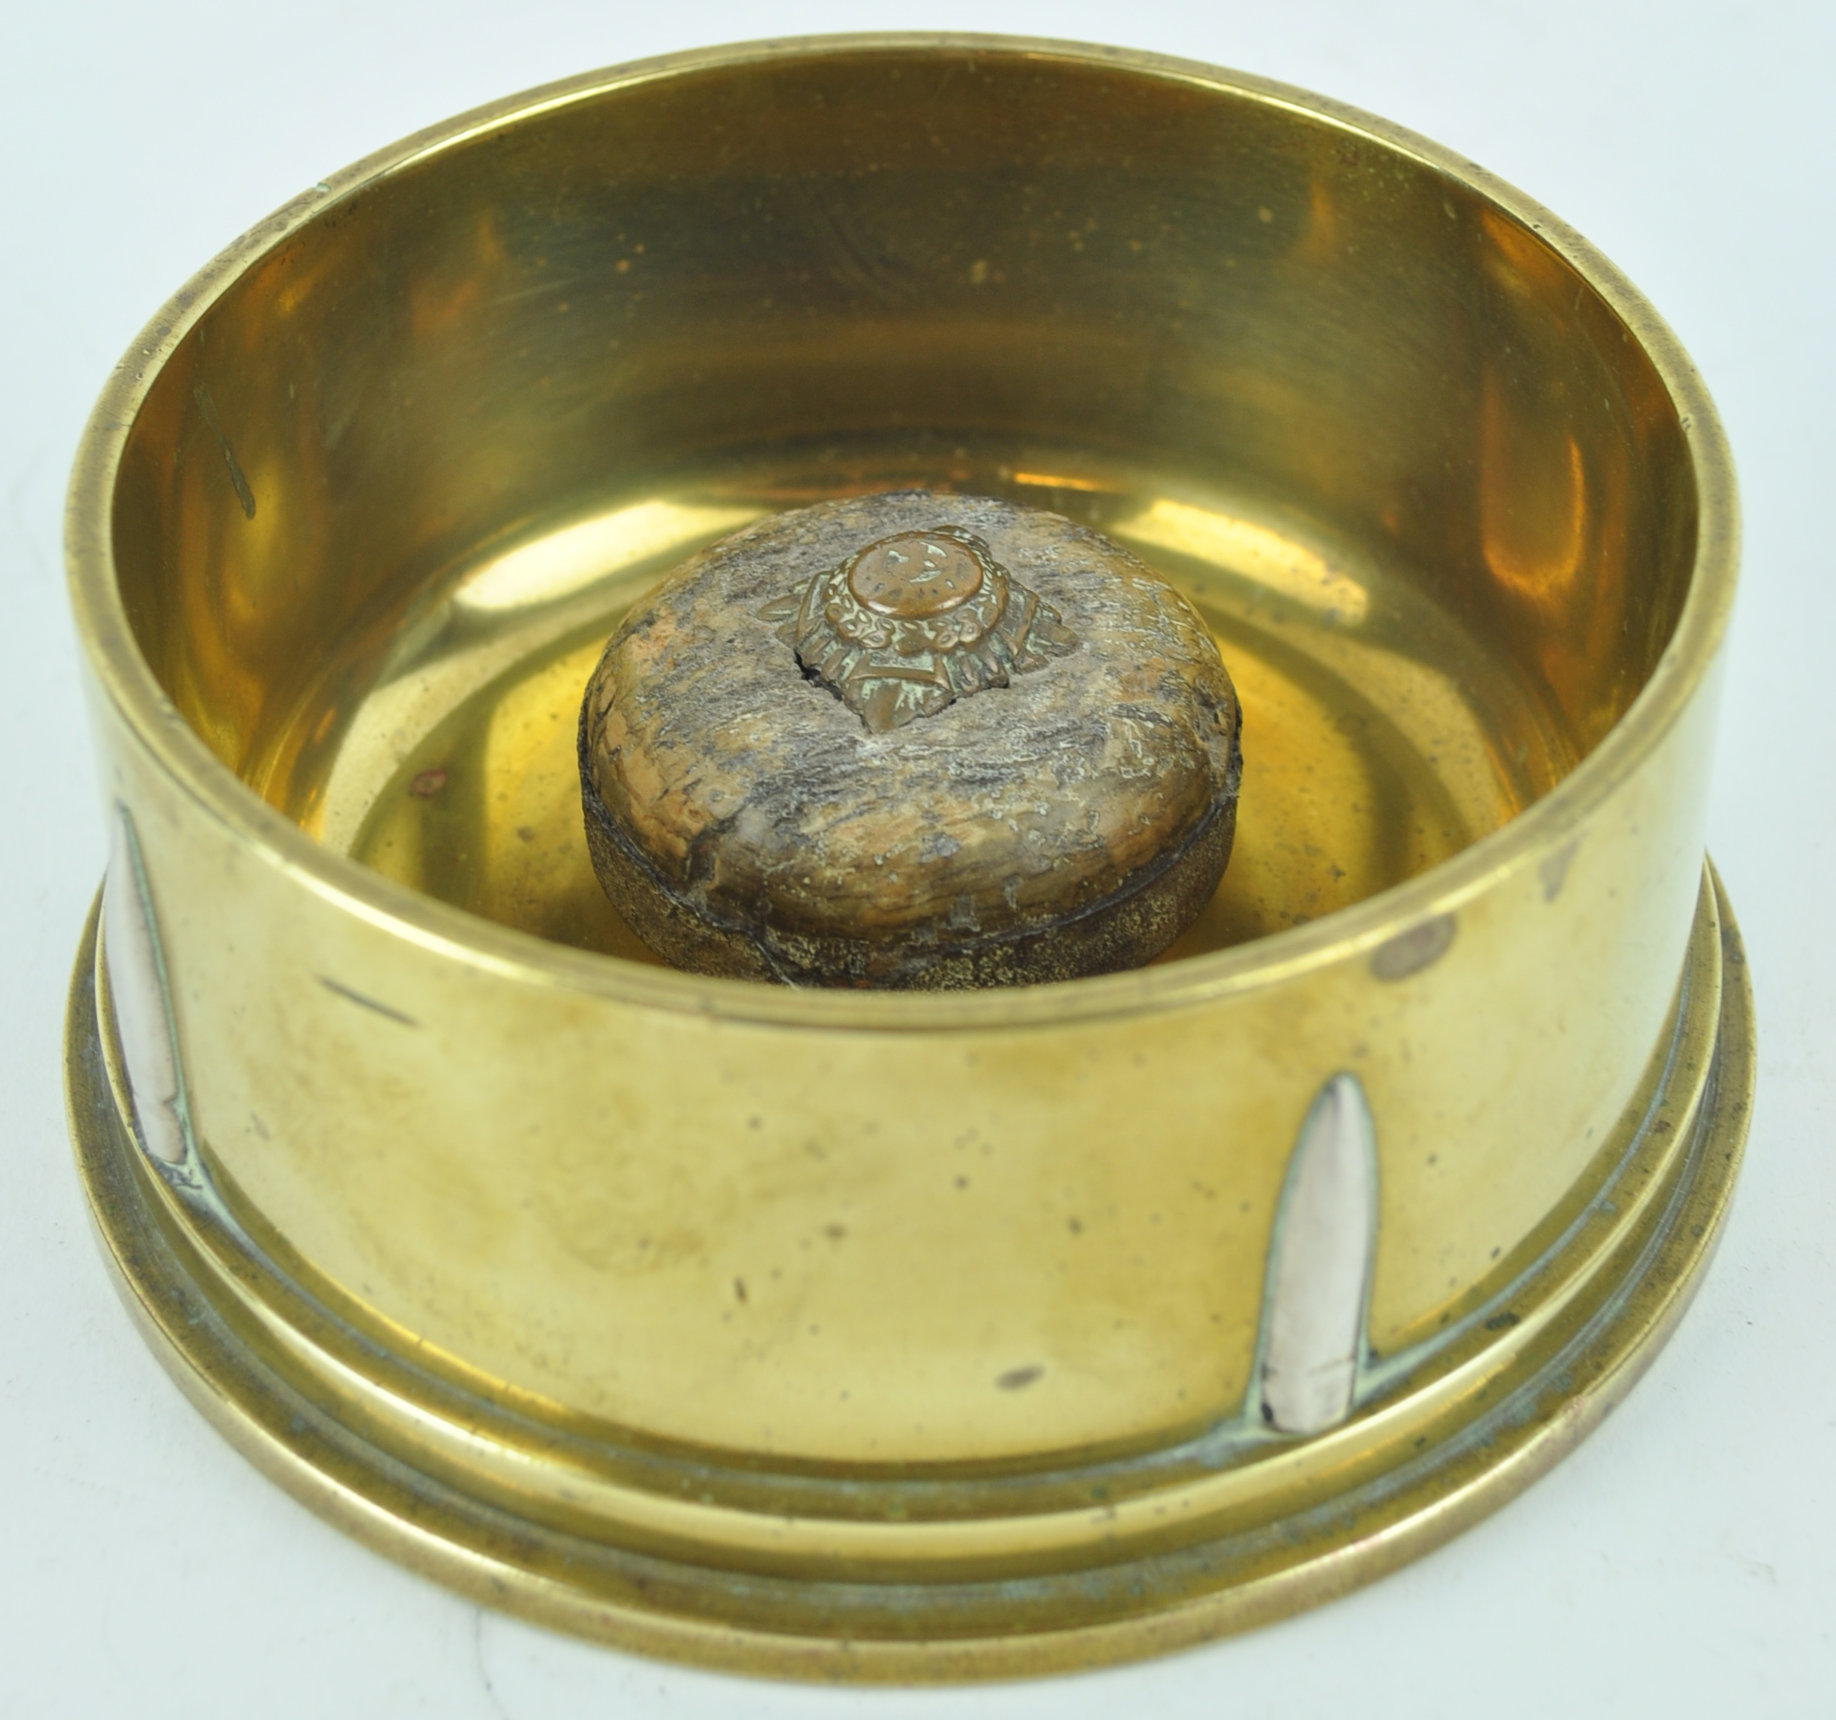 A 1942 trench art ashtray, constructed from the base of a shell case with bullet head decoration,